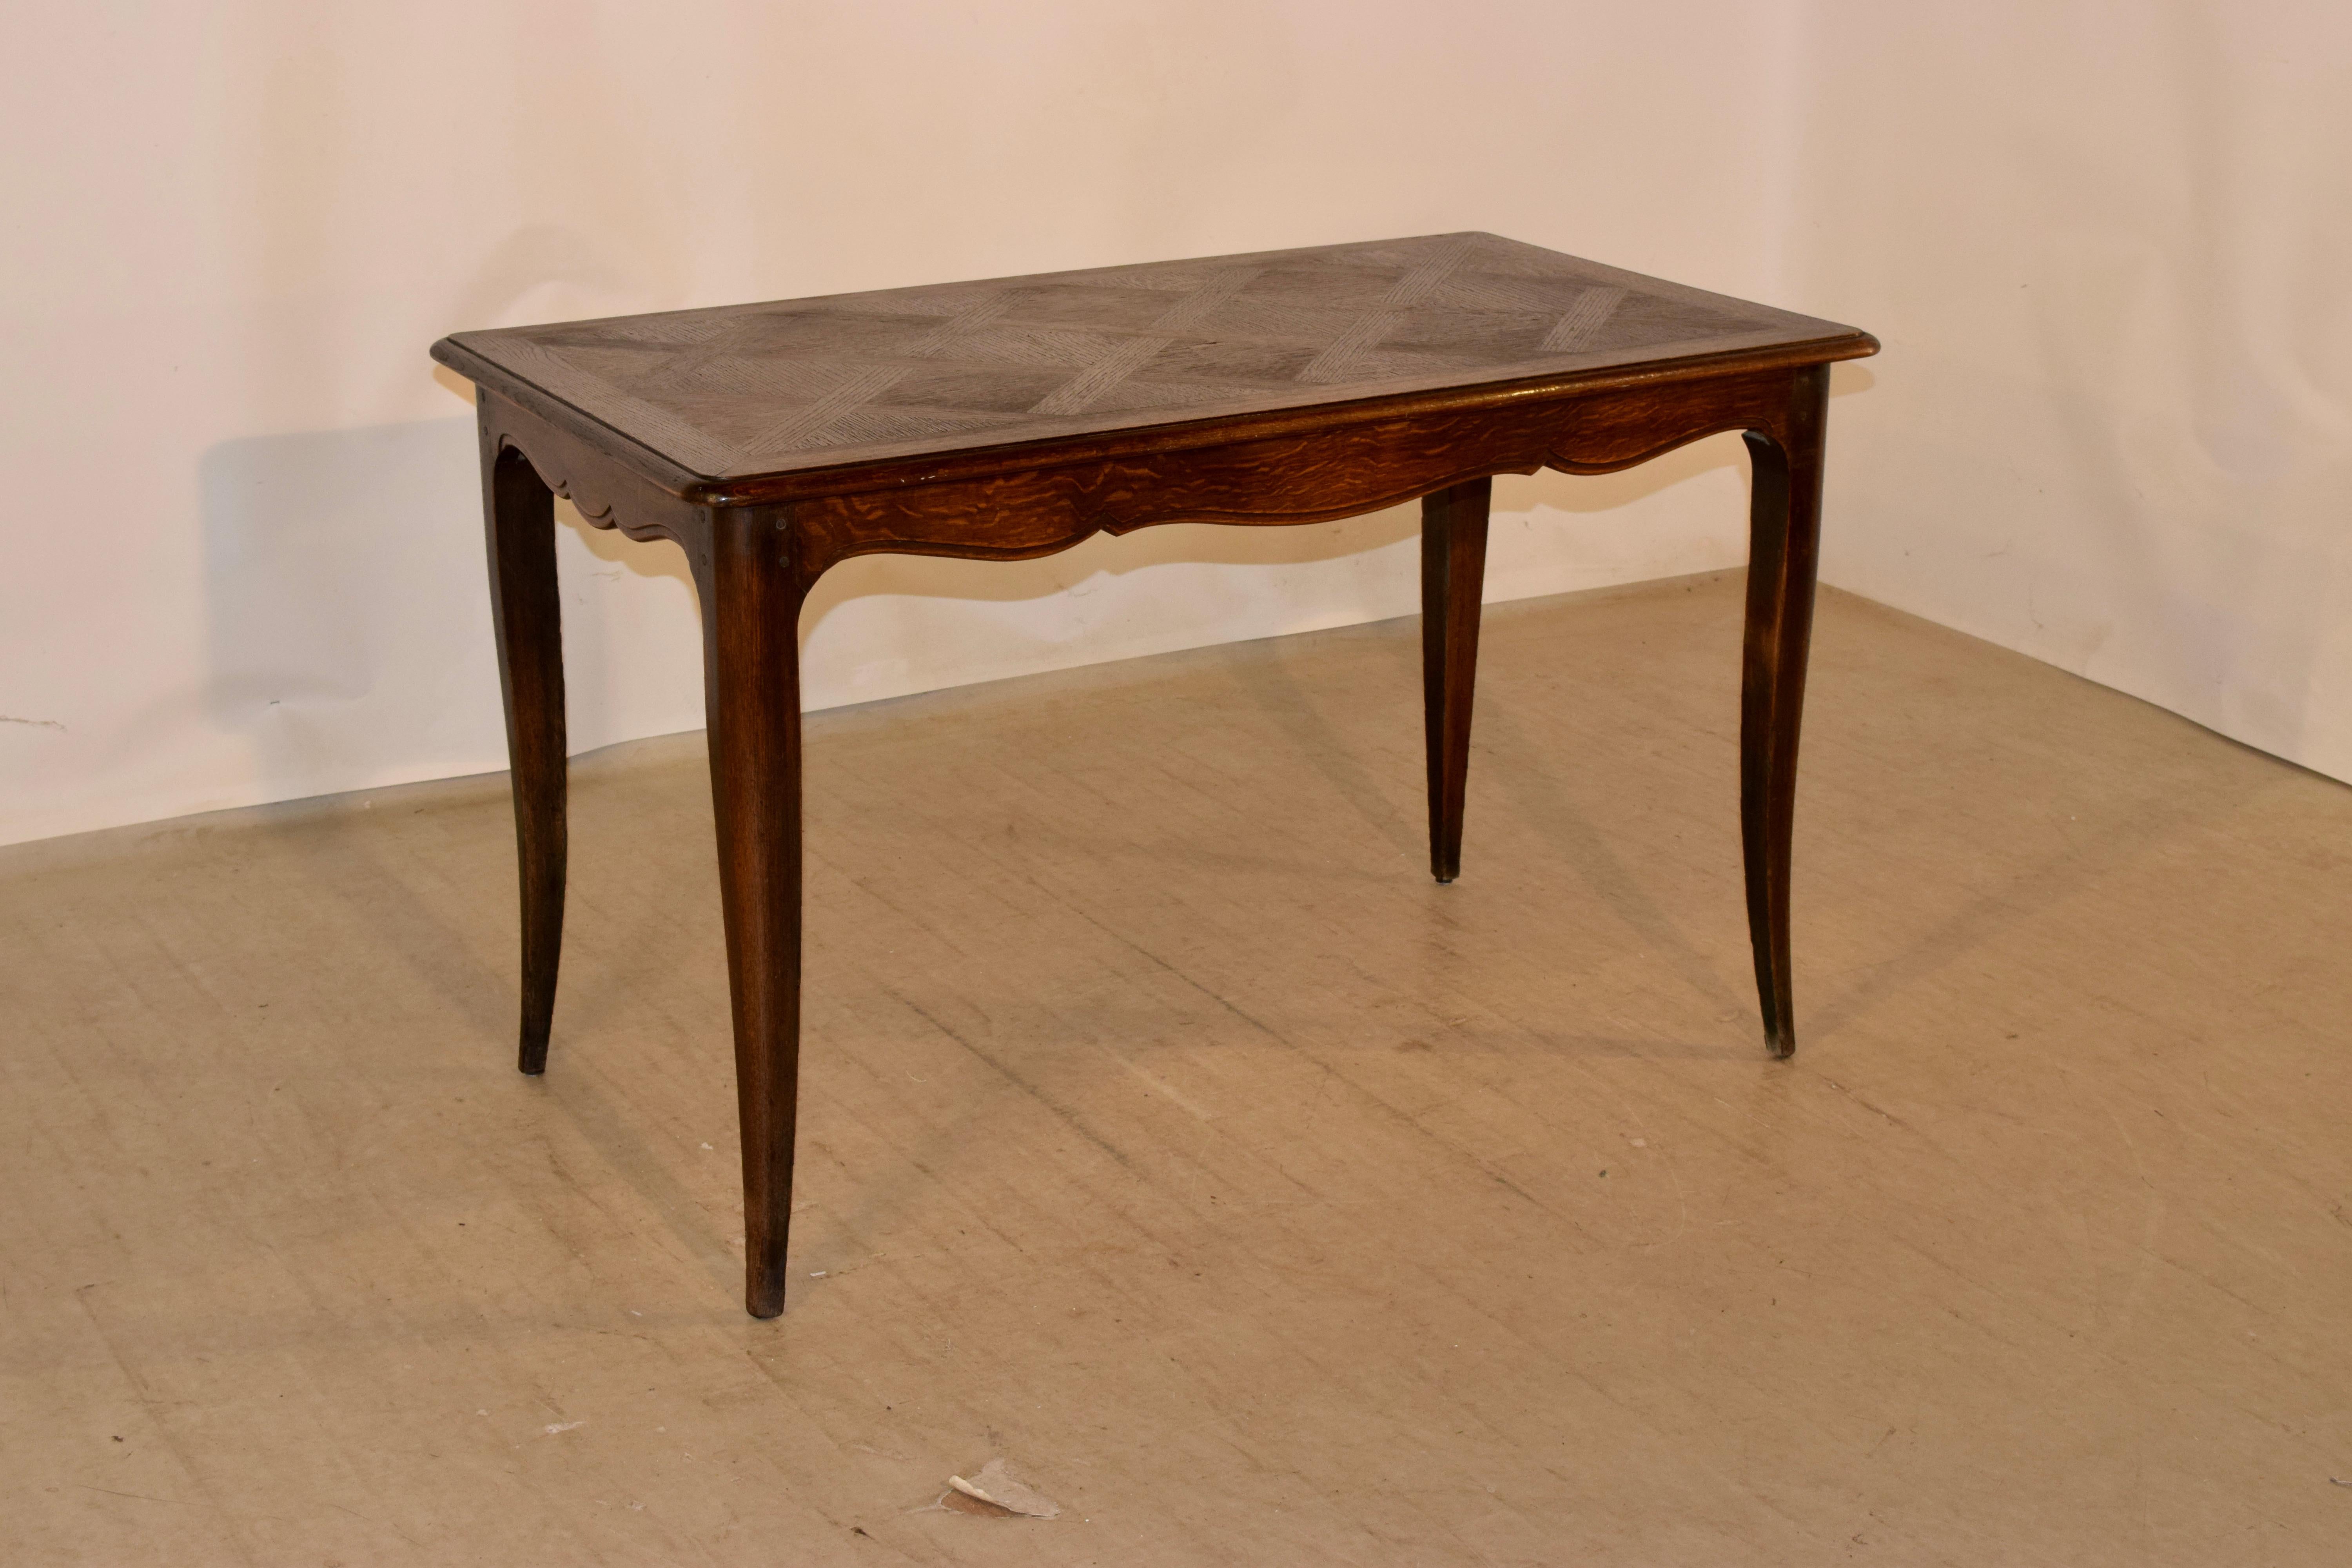 Late 19th century table with a lovely banded and bevelled edge surrounding a parquetry central panel. The apron is scalloped and has a bevelled edge and the table is supported on splayed cabriole legs. The apron measures 25.5 inches in height.